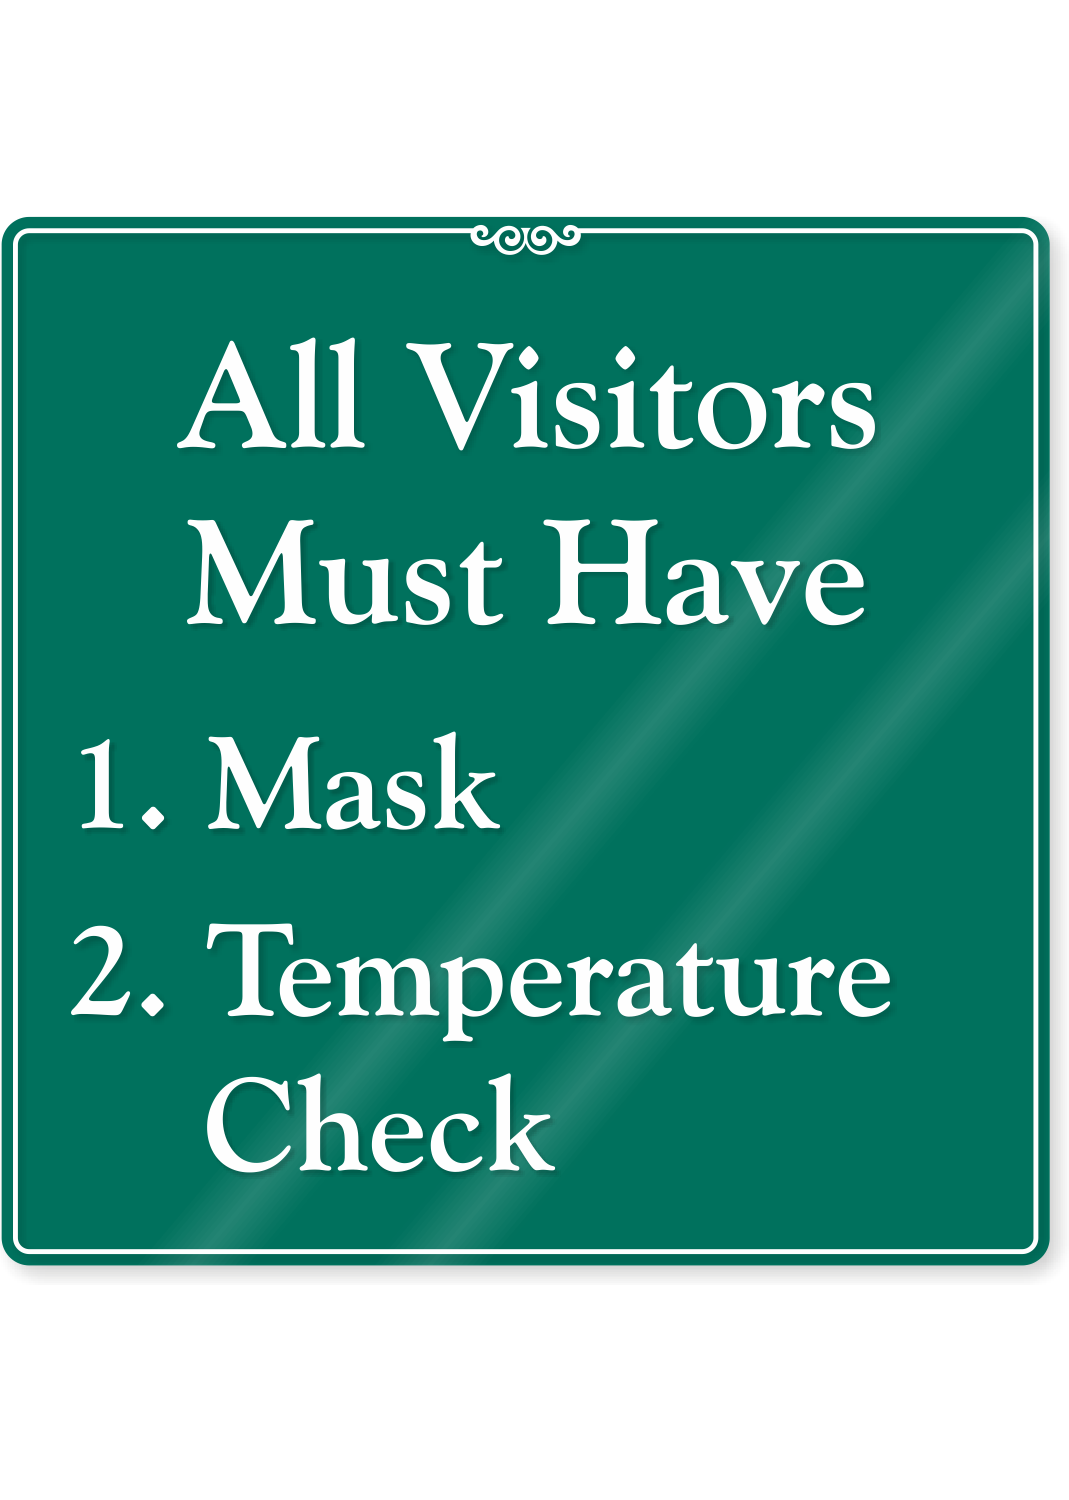 https://images.mysafetysign.com/img/lg/S/all-visitors-must-have-mask-temperature-check-sign-se-7524_showcase-grnrev.png